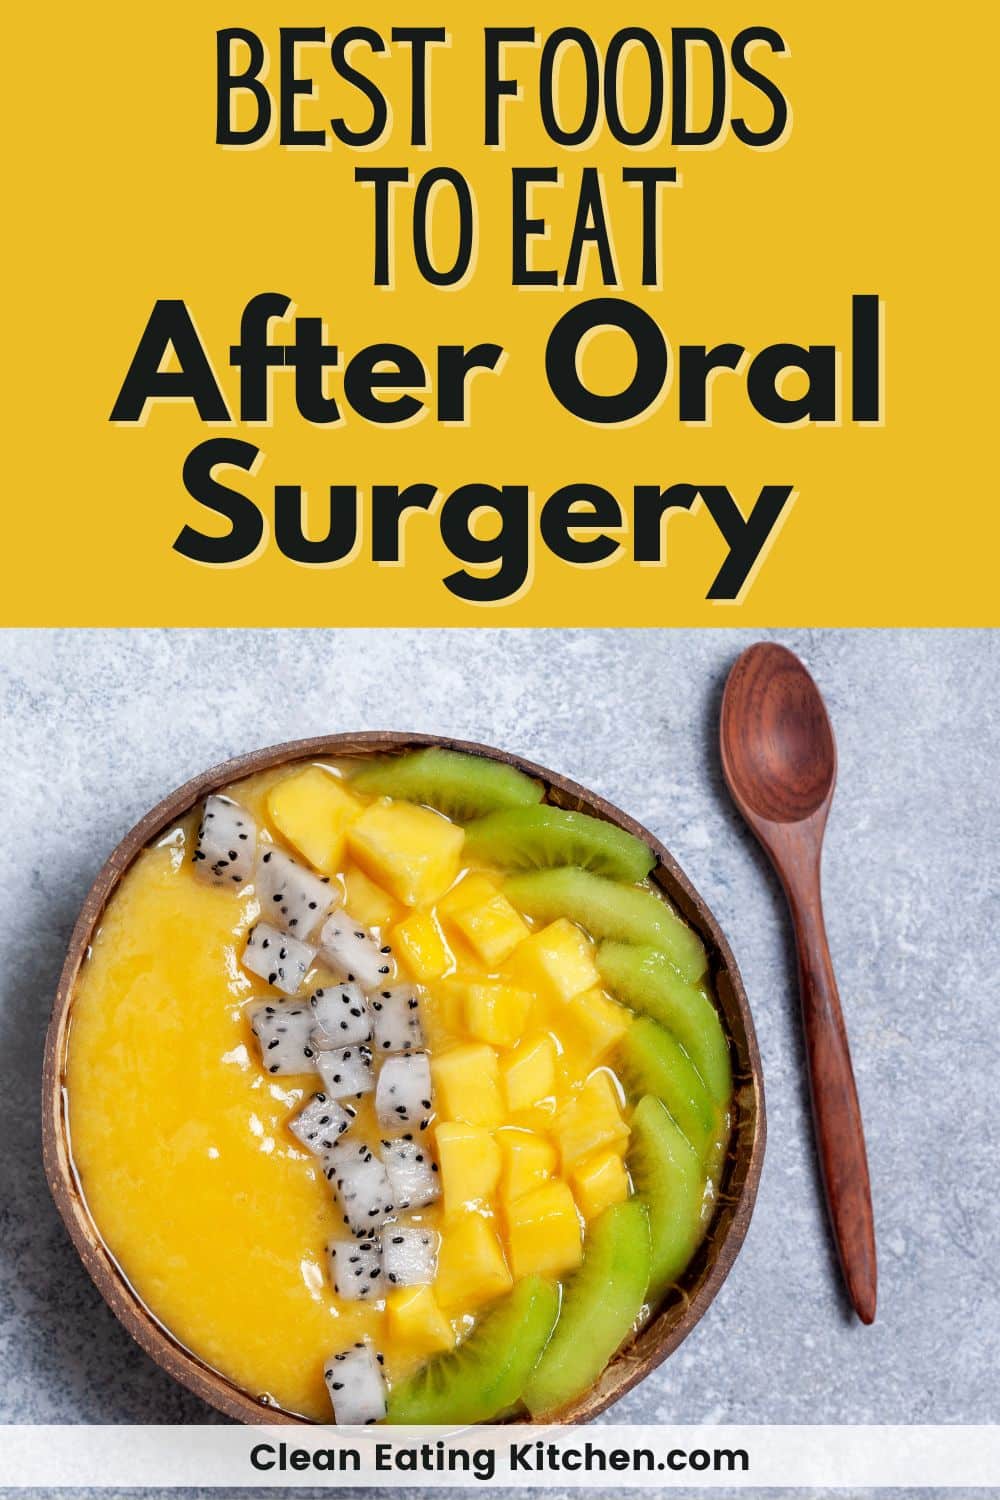 What to cook for someone who had oral surgery?